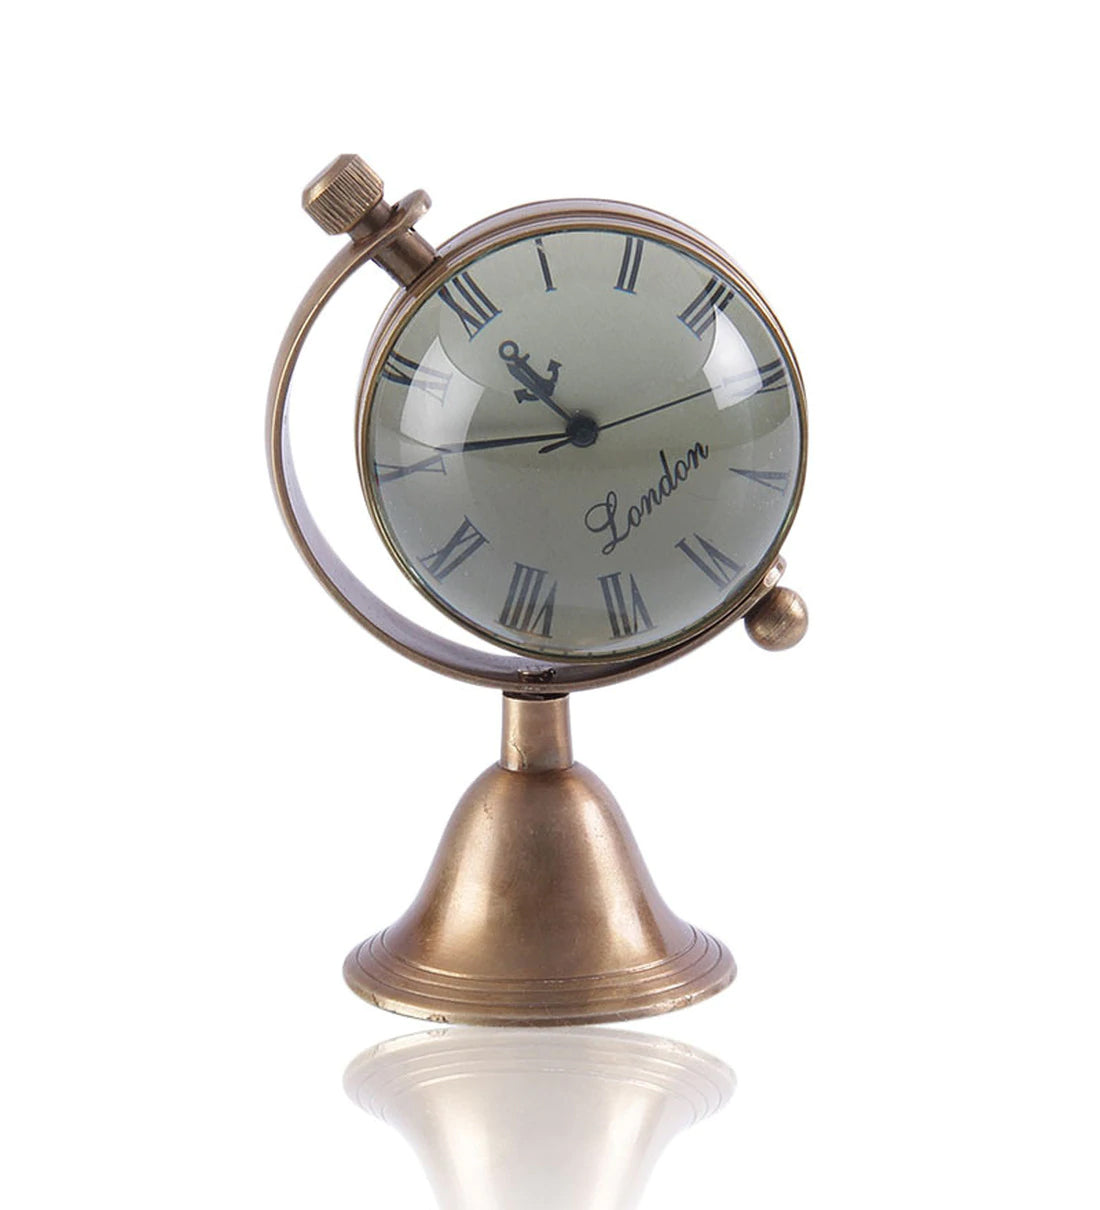 Brass Analog Table Clock for Office, Home Decor ( London Dial ) Wemy Store